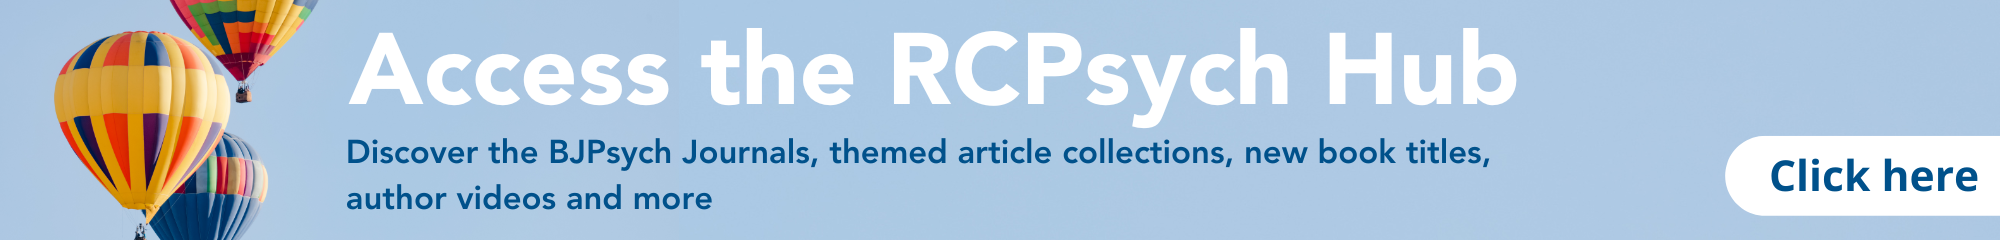 Access the RCPsych Hub and discover the BJPsych Journals, themed article collections, new book titles, author videos and more